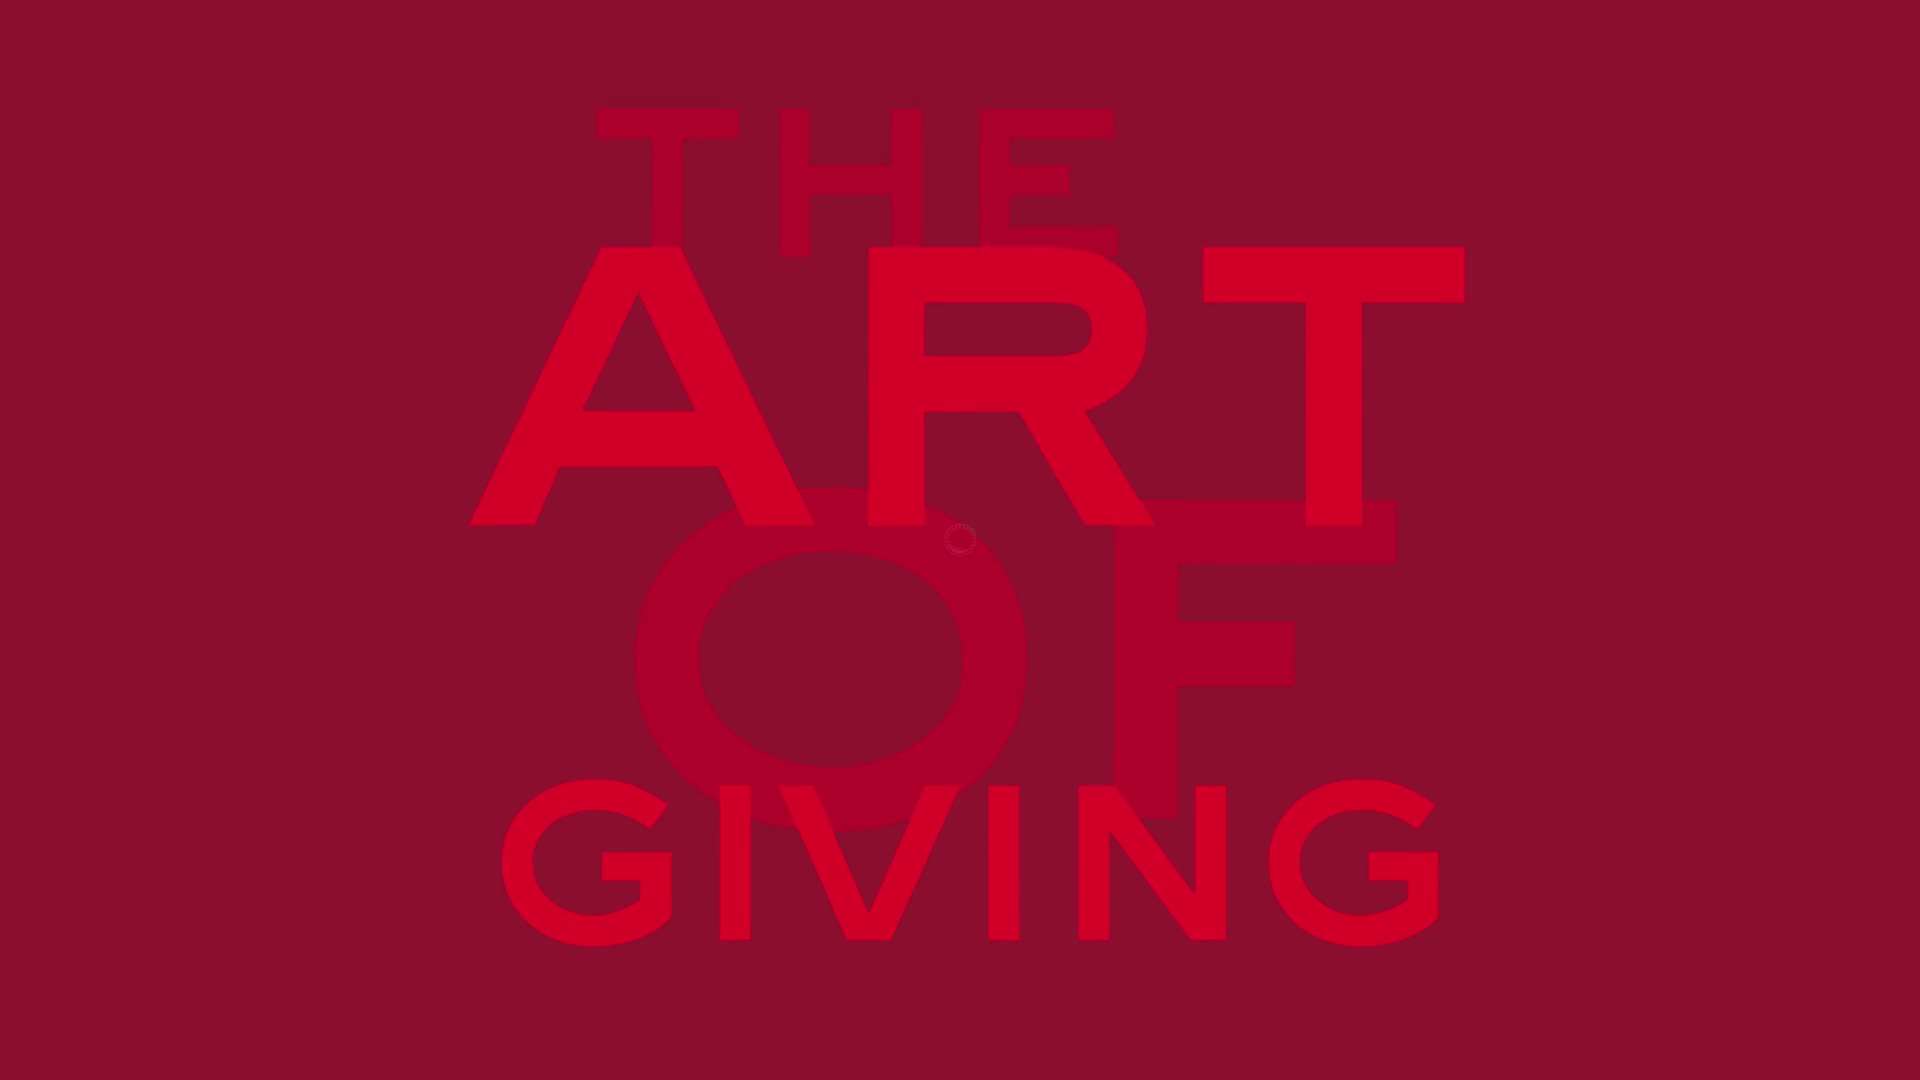 WEMPE - The Art of Giving | Surprise